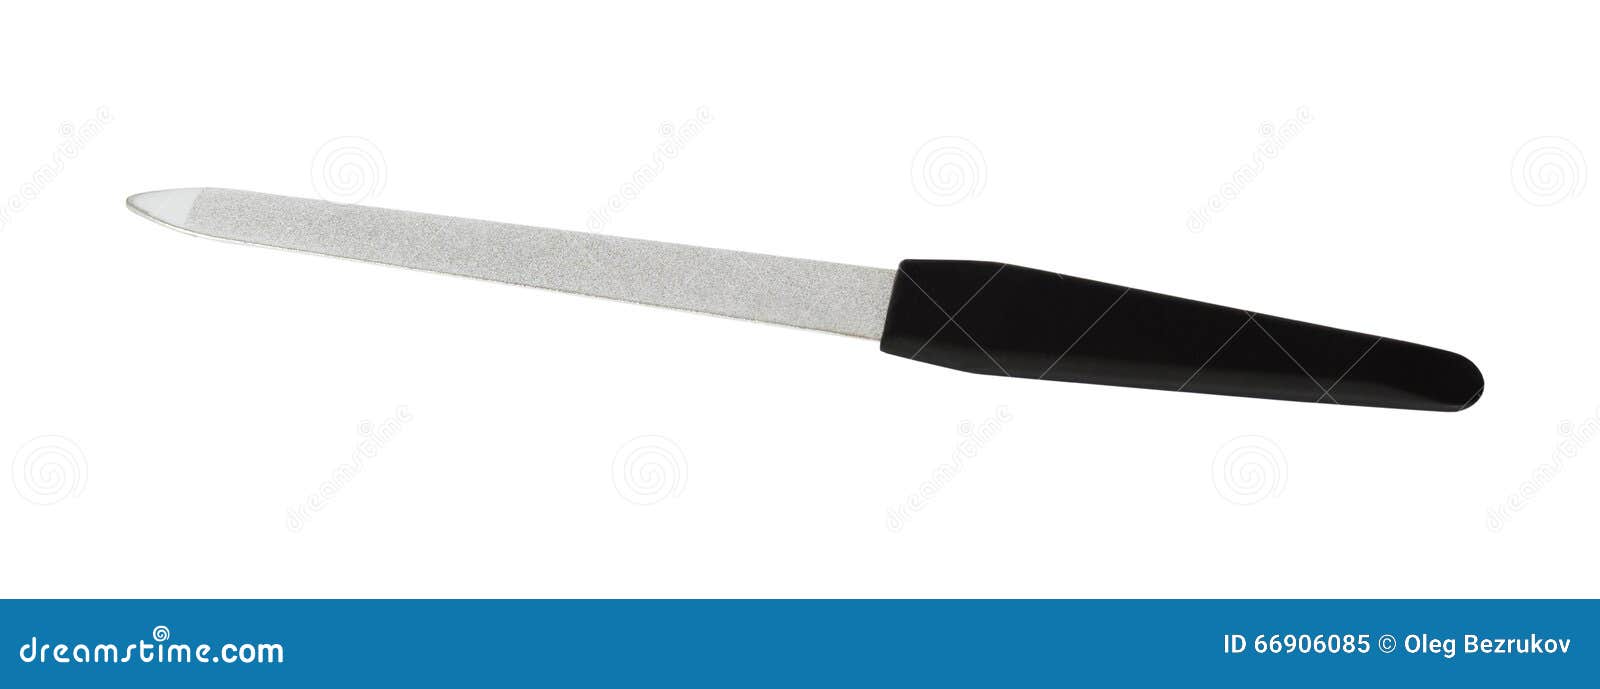 nailfile with a black handle